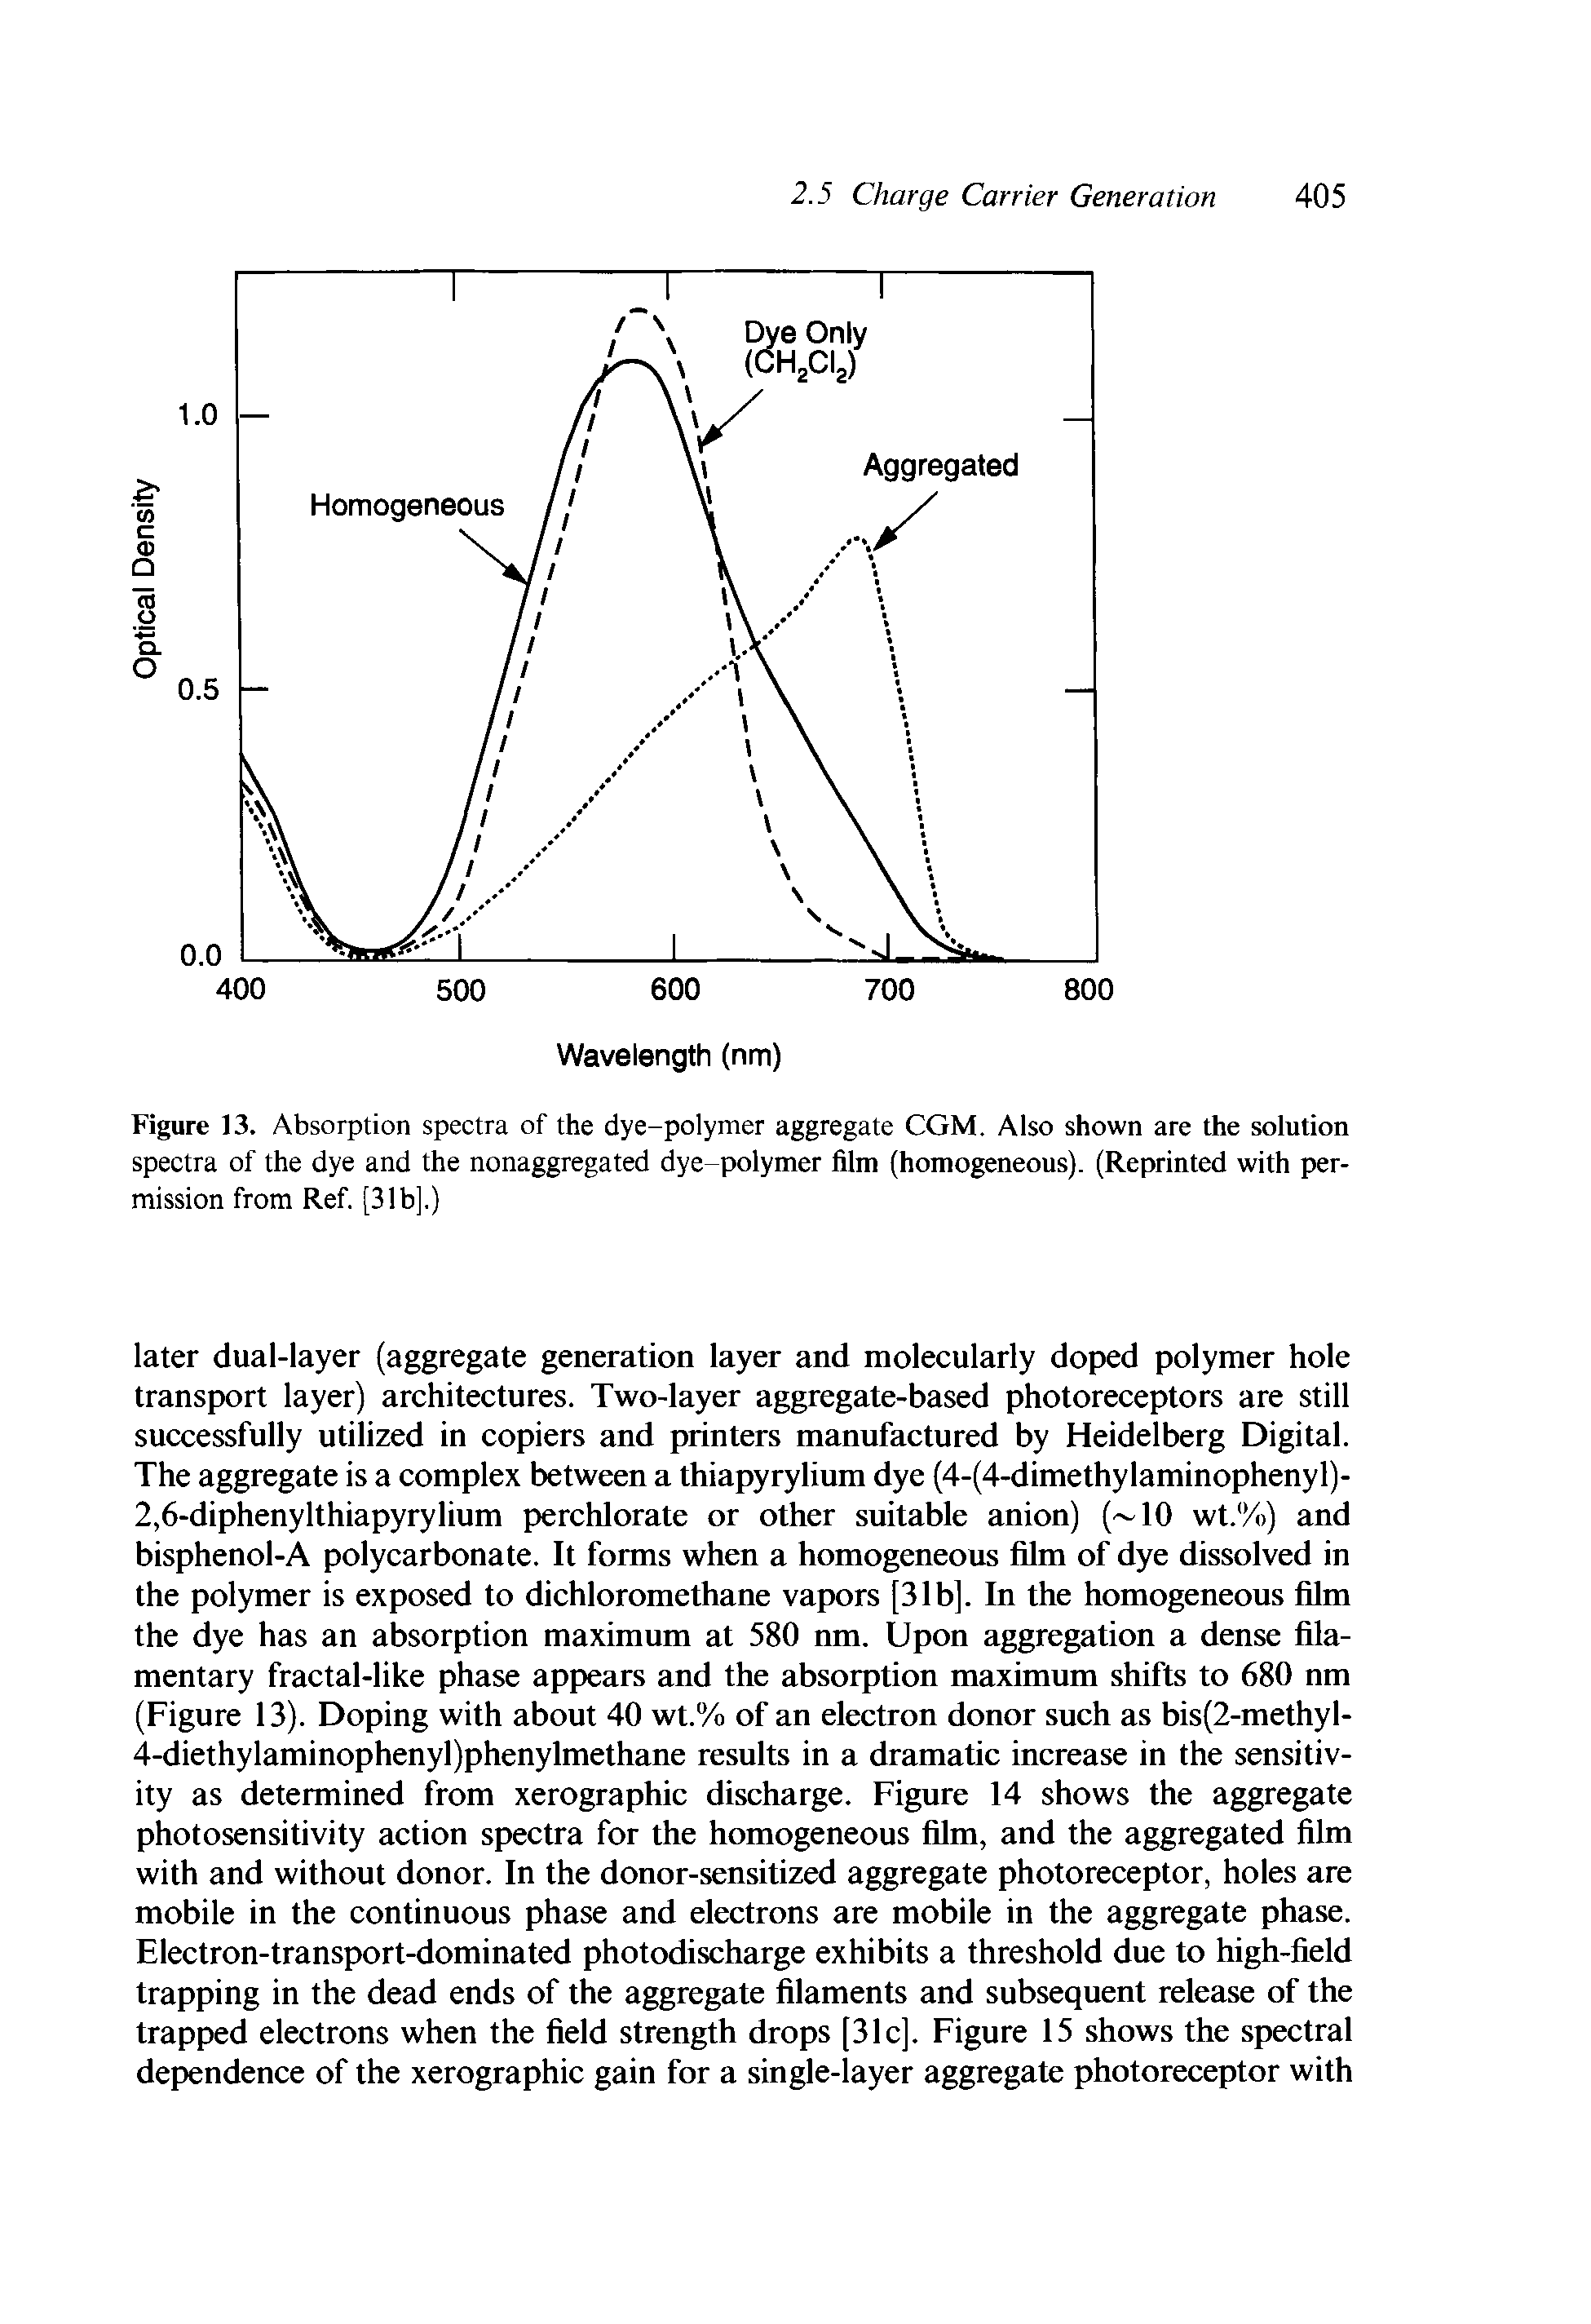 Figure 13. Absorption spectra of the dye-polymer aggregate CGM. Also shown are the solution spectra of the dye and the nonaggregated dye-polymer film (homogeneous). (Reprinted with permission from Ref. [31b].)...